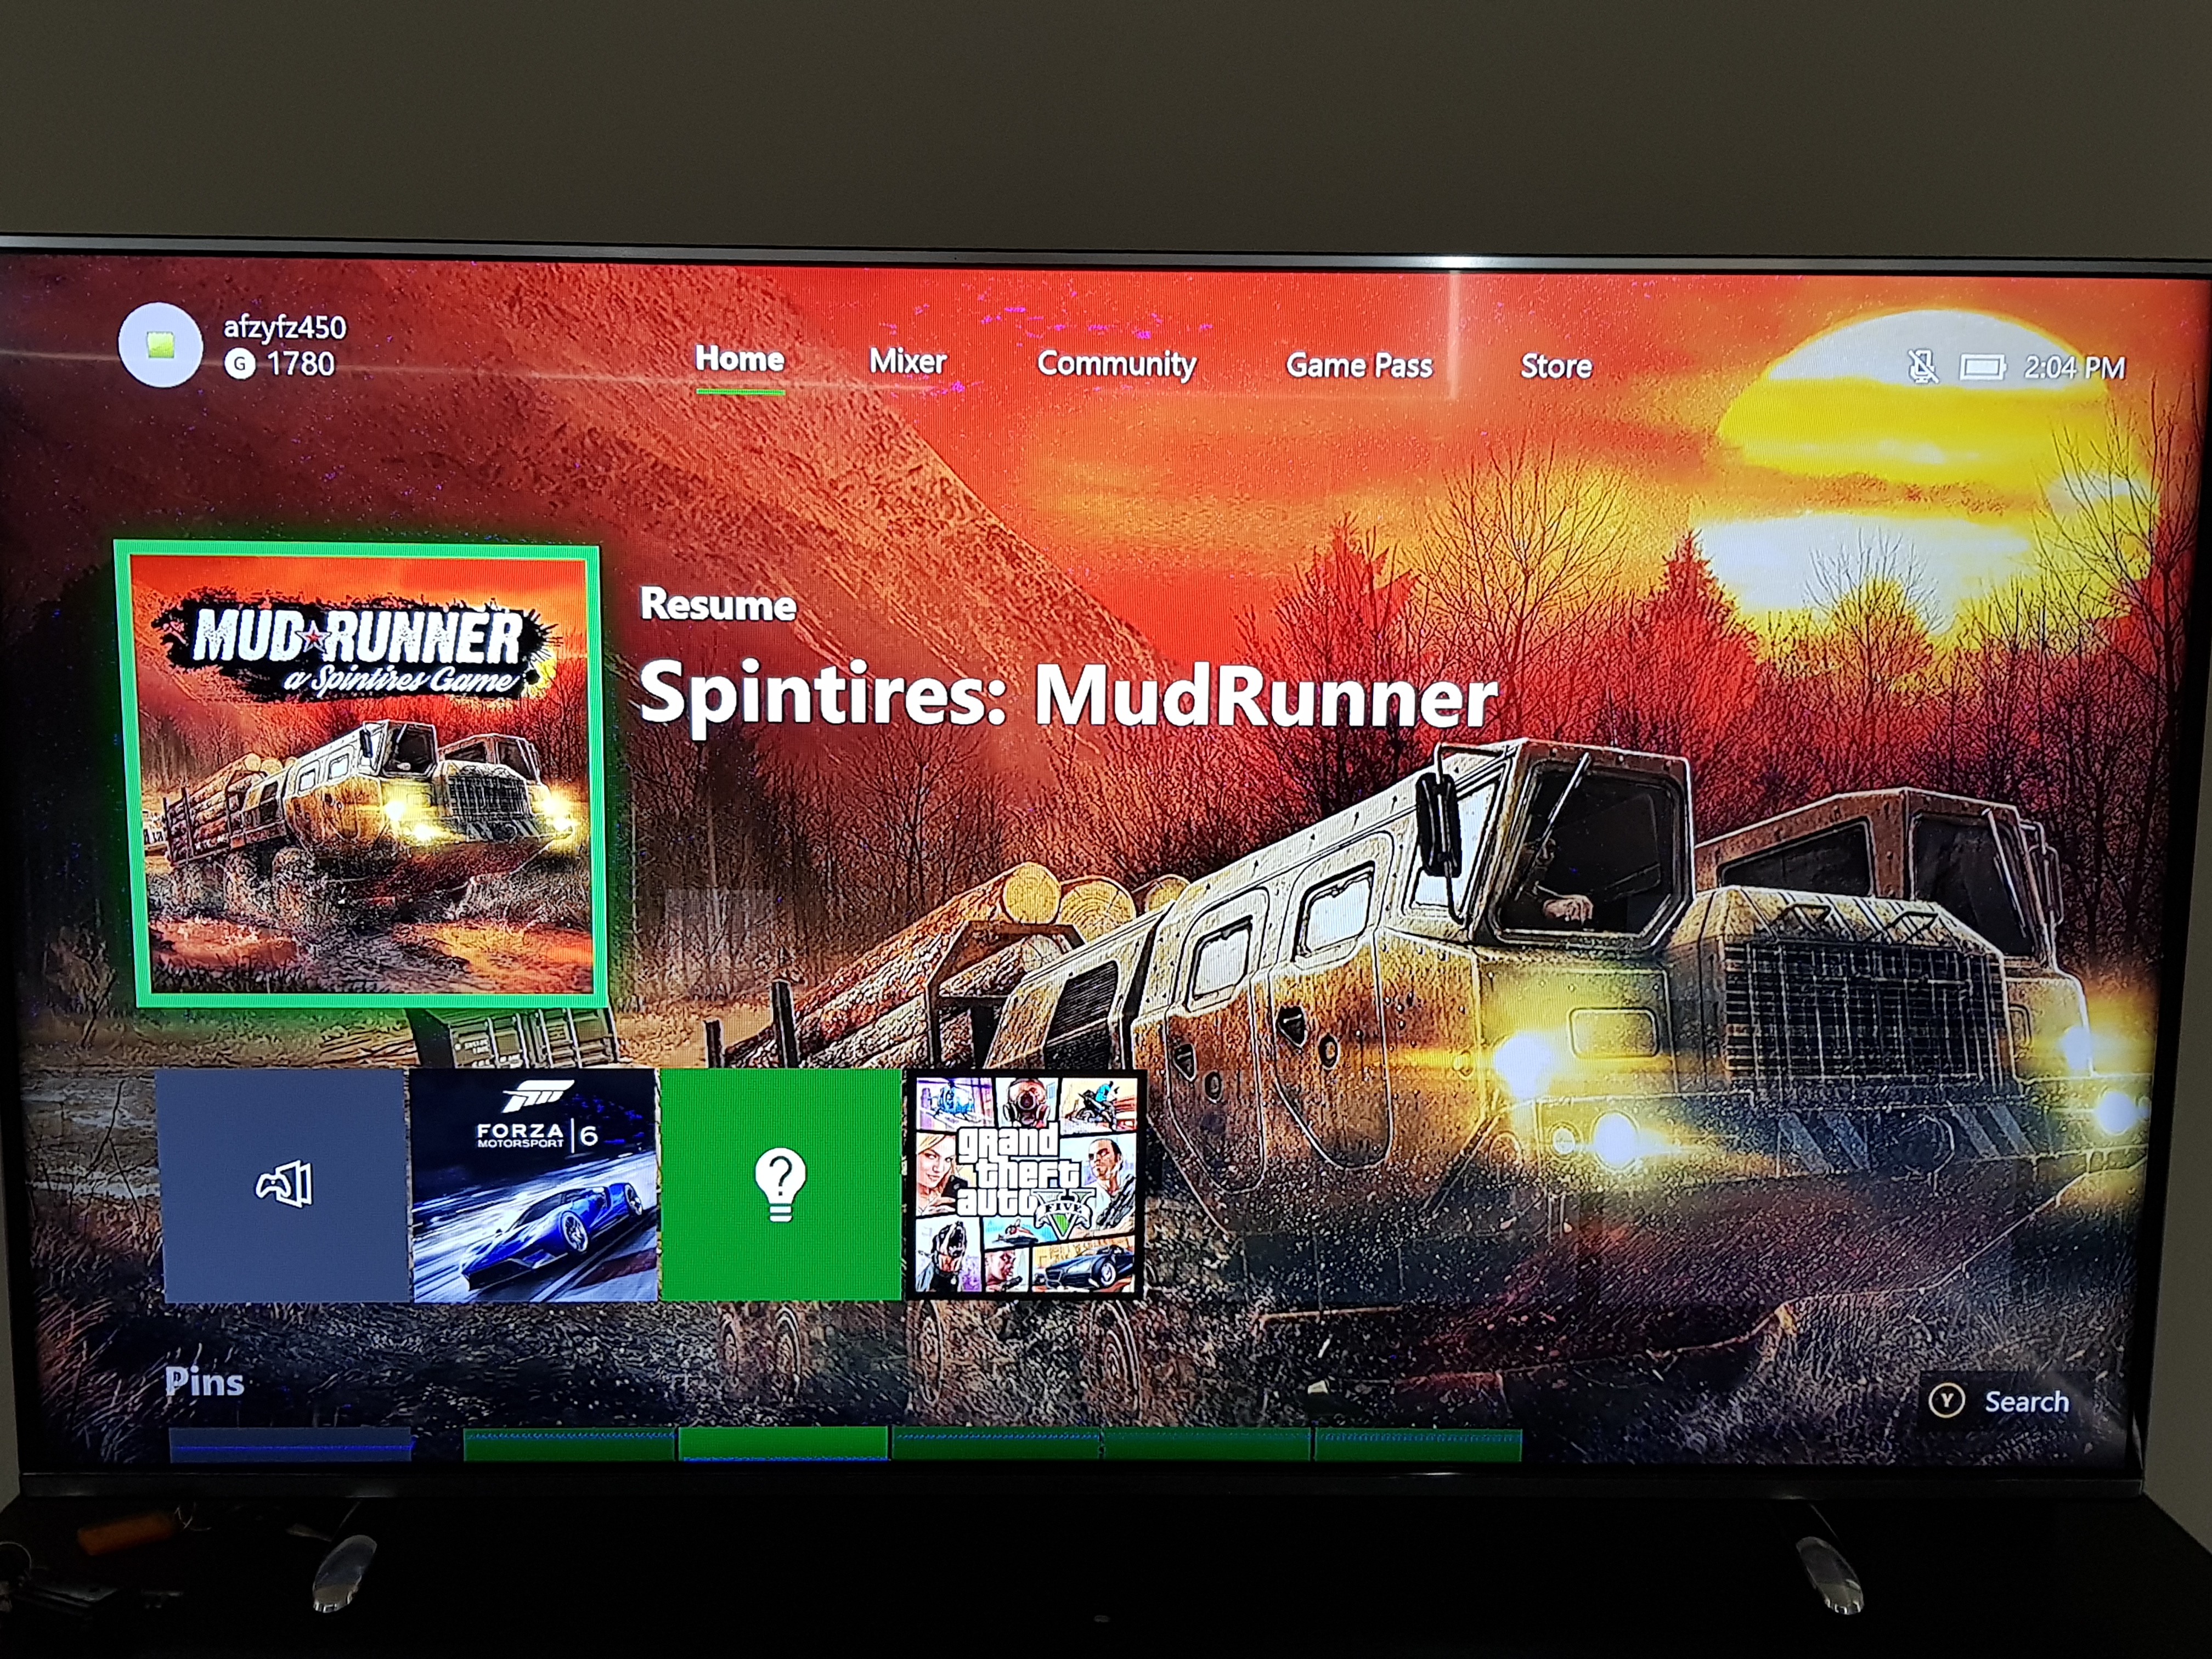 Blue lines on the screen xbox one - Microsoft Community